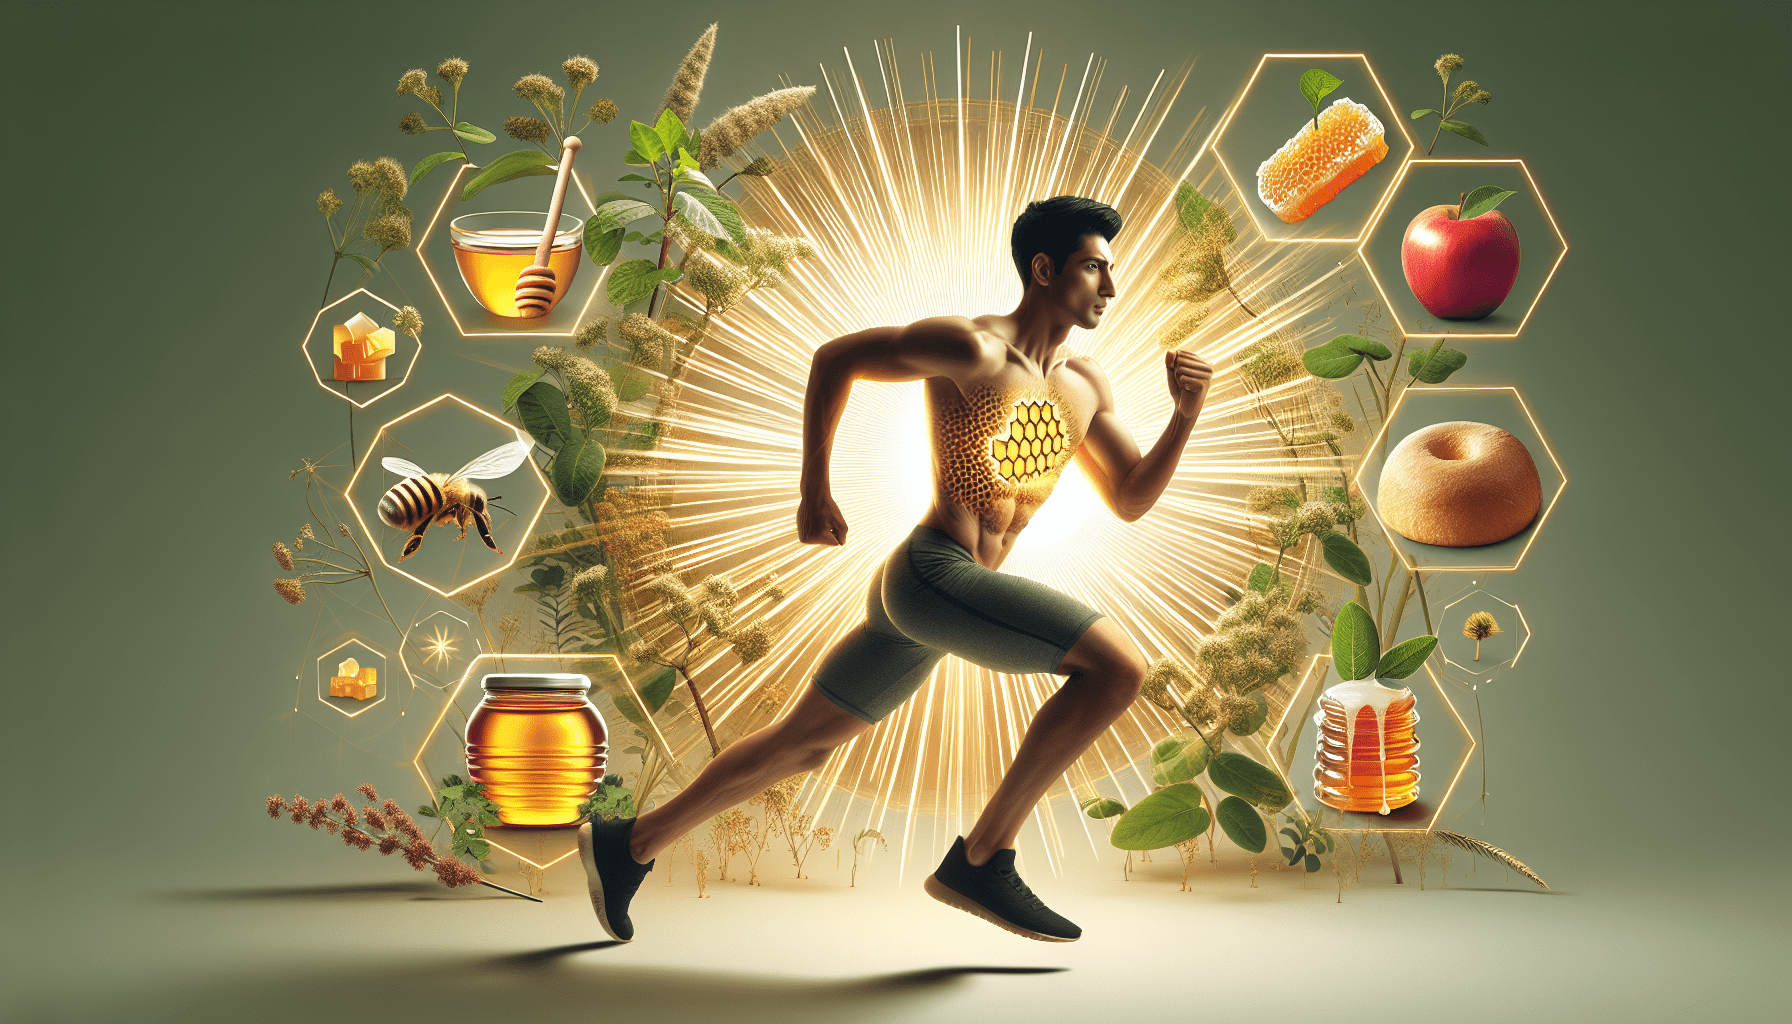 11 how does honey contribute to energy levels and athletic performance